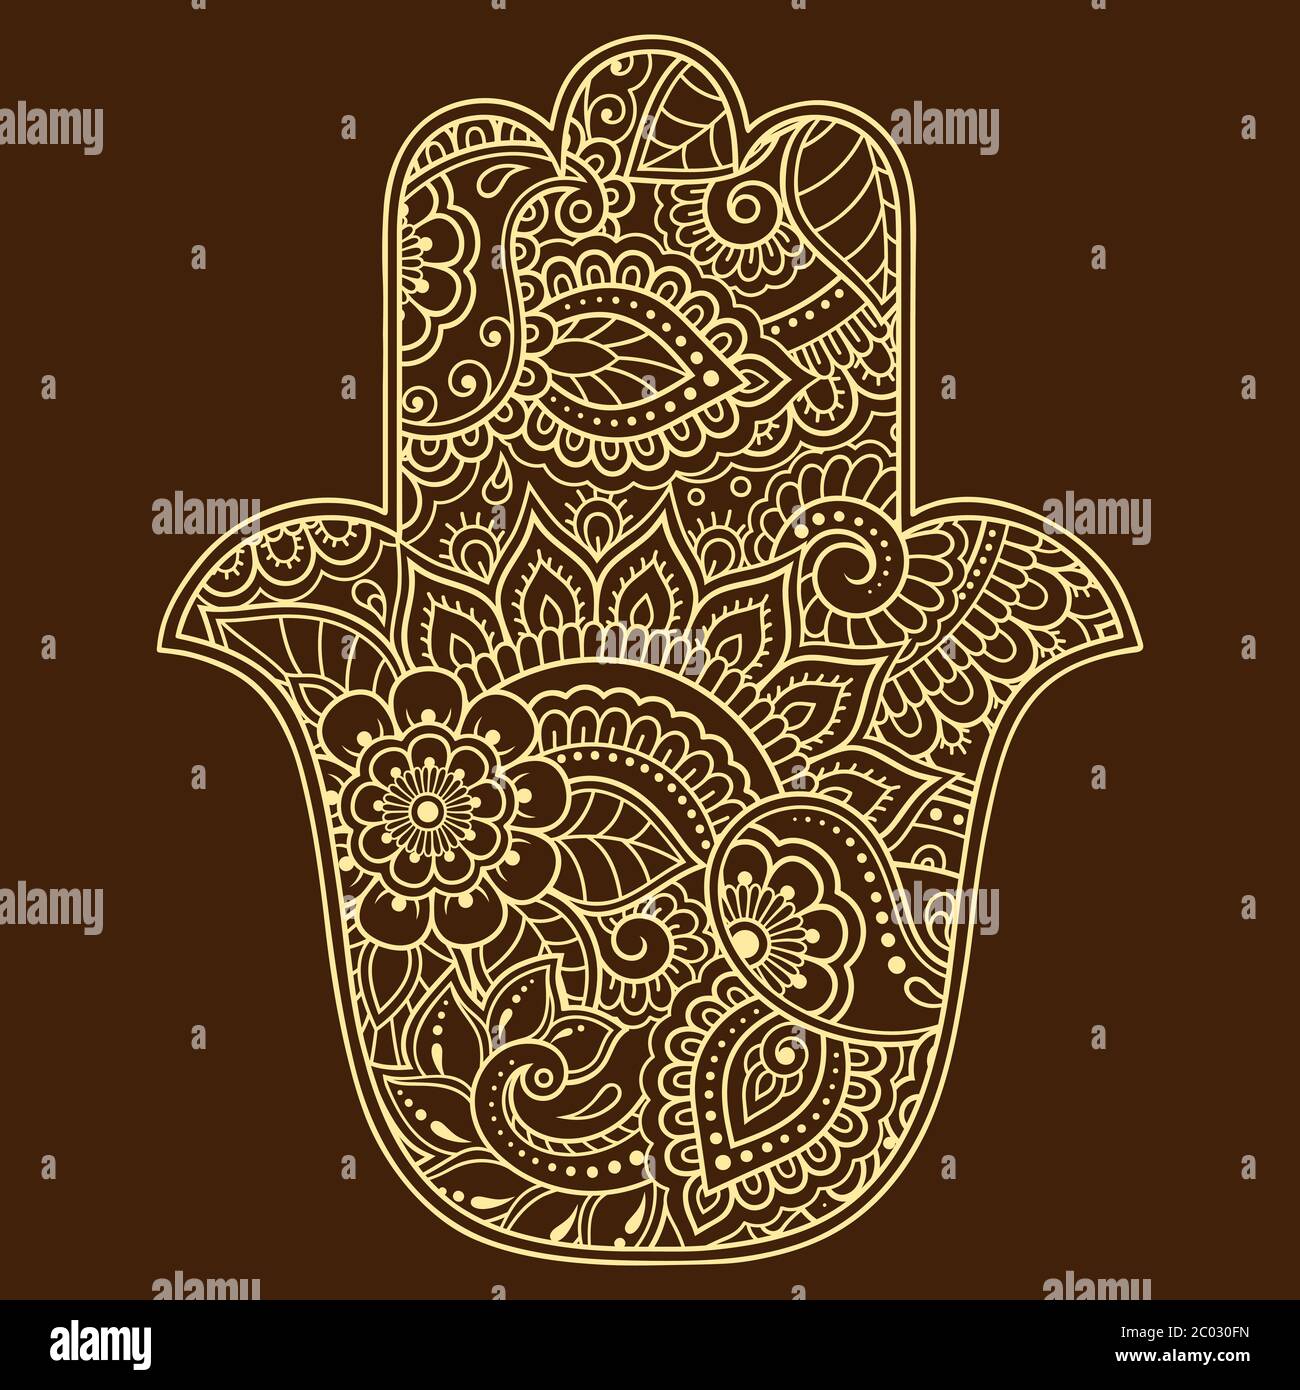 Hamsa hand drawn symbol with flower. Decorative pattern in oriental style for interior decoration and henna drawings. The ancient sign of 'Hand of Fat Stock Vector